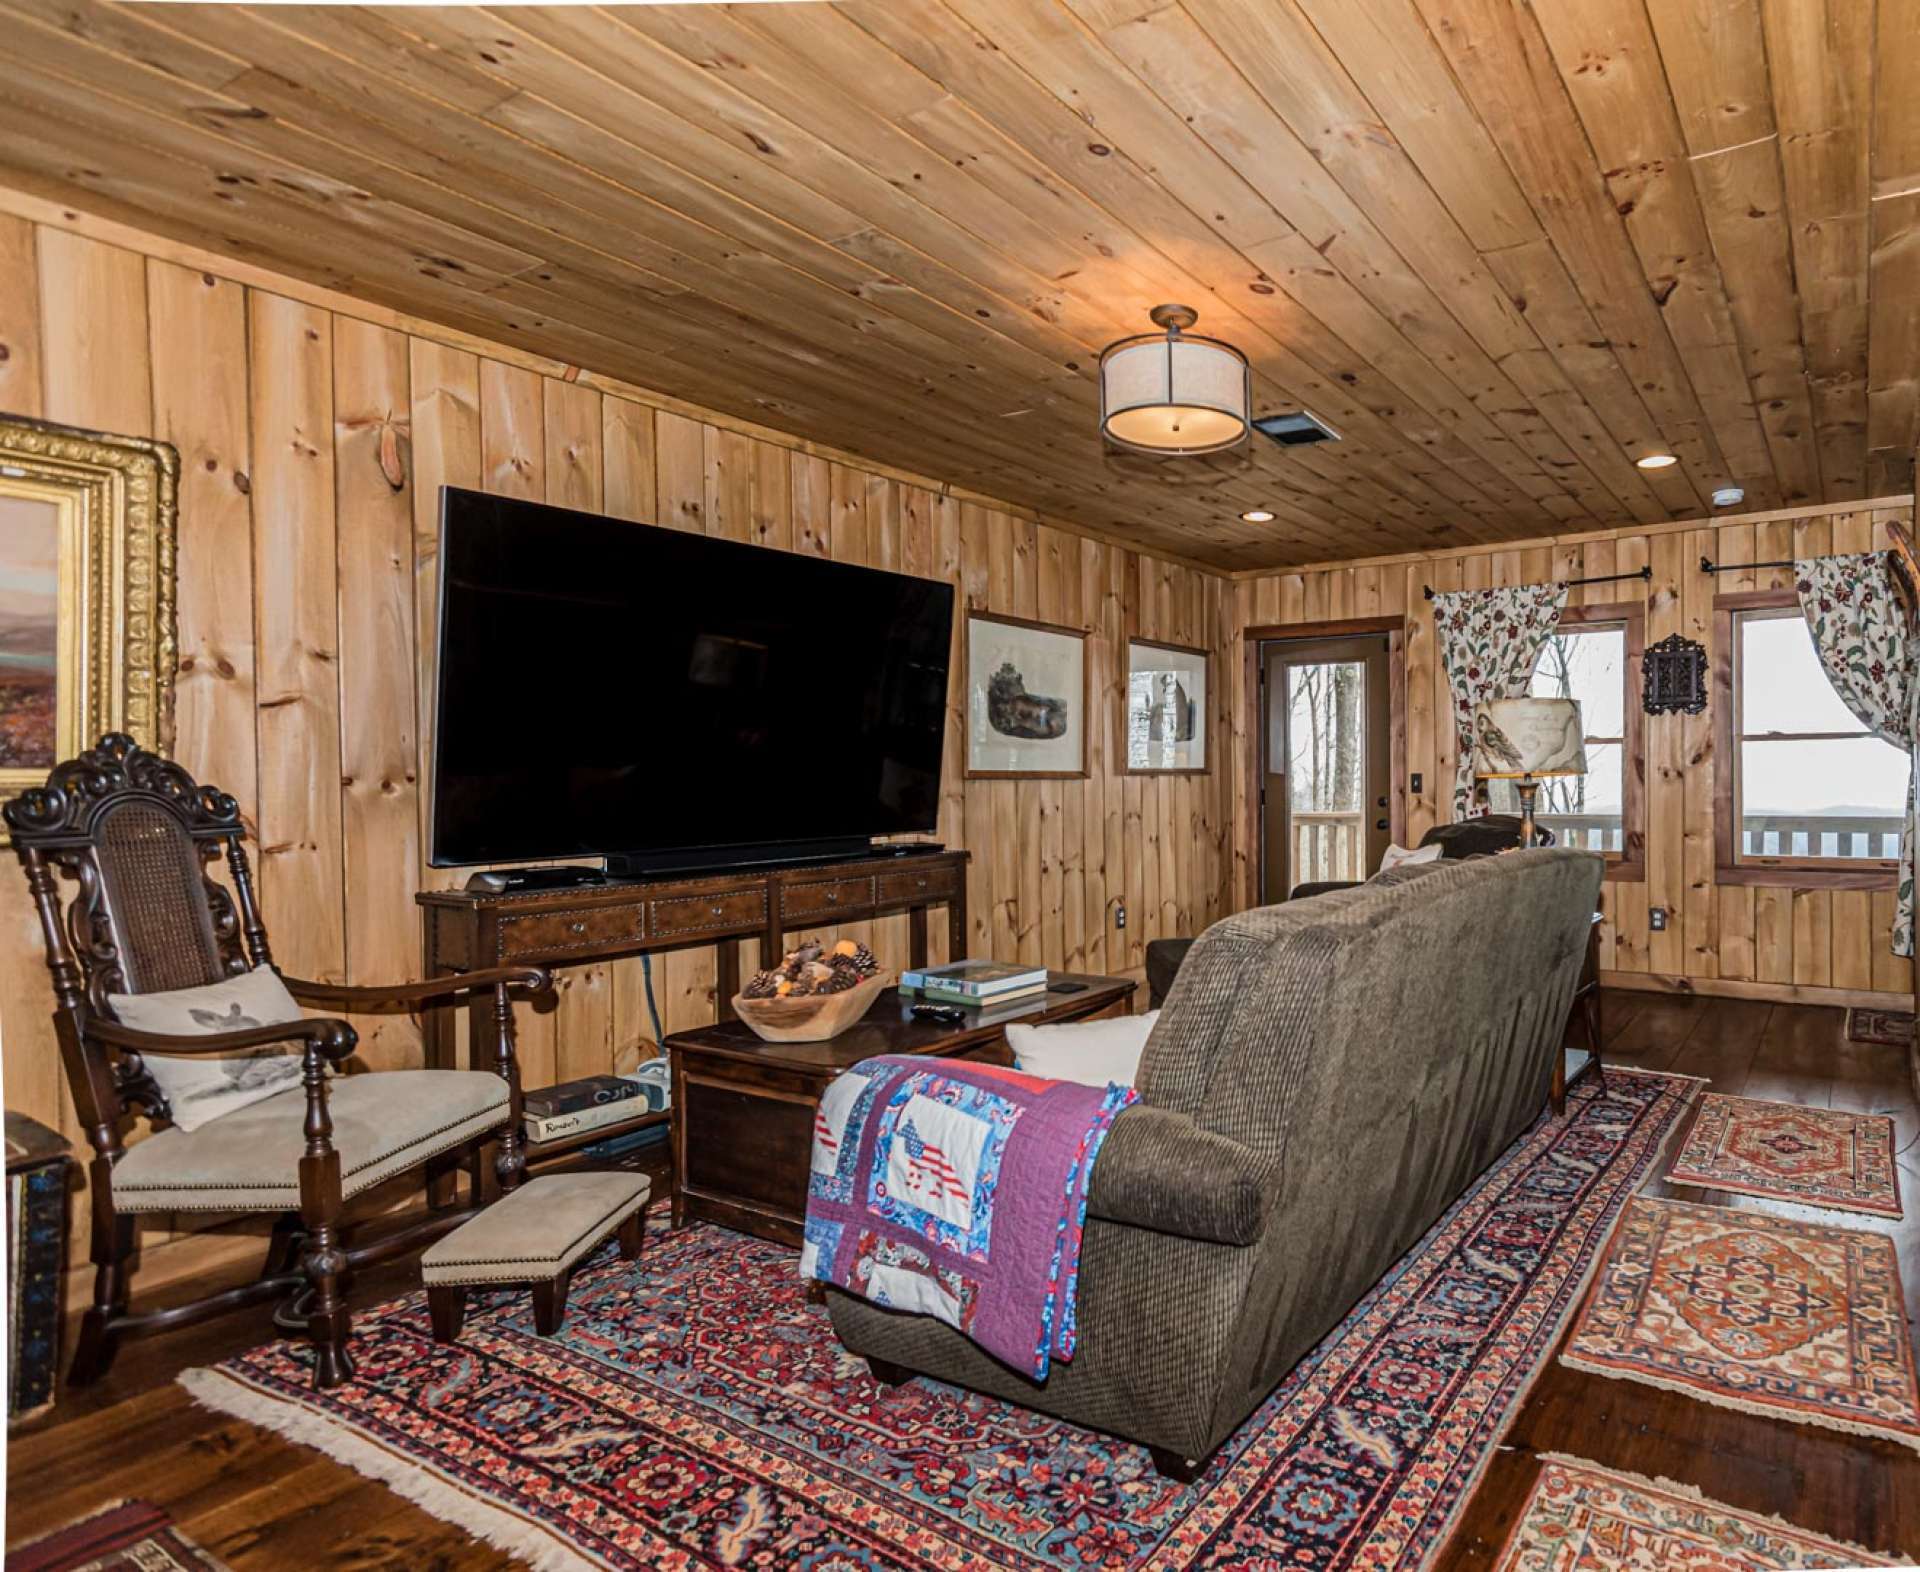 Perfect retreat for watching the big game.